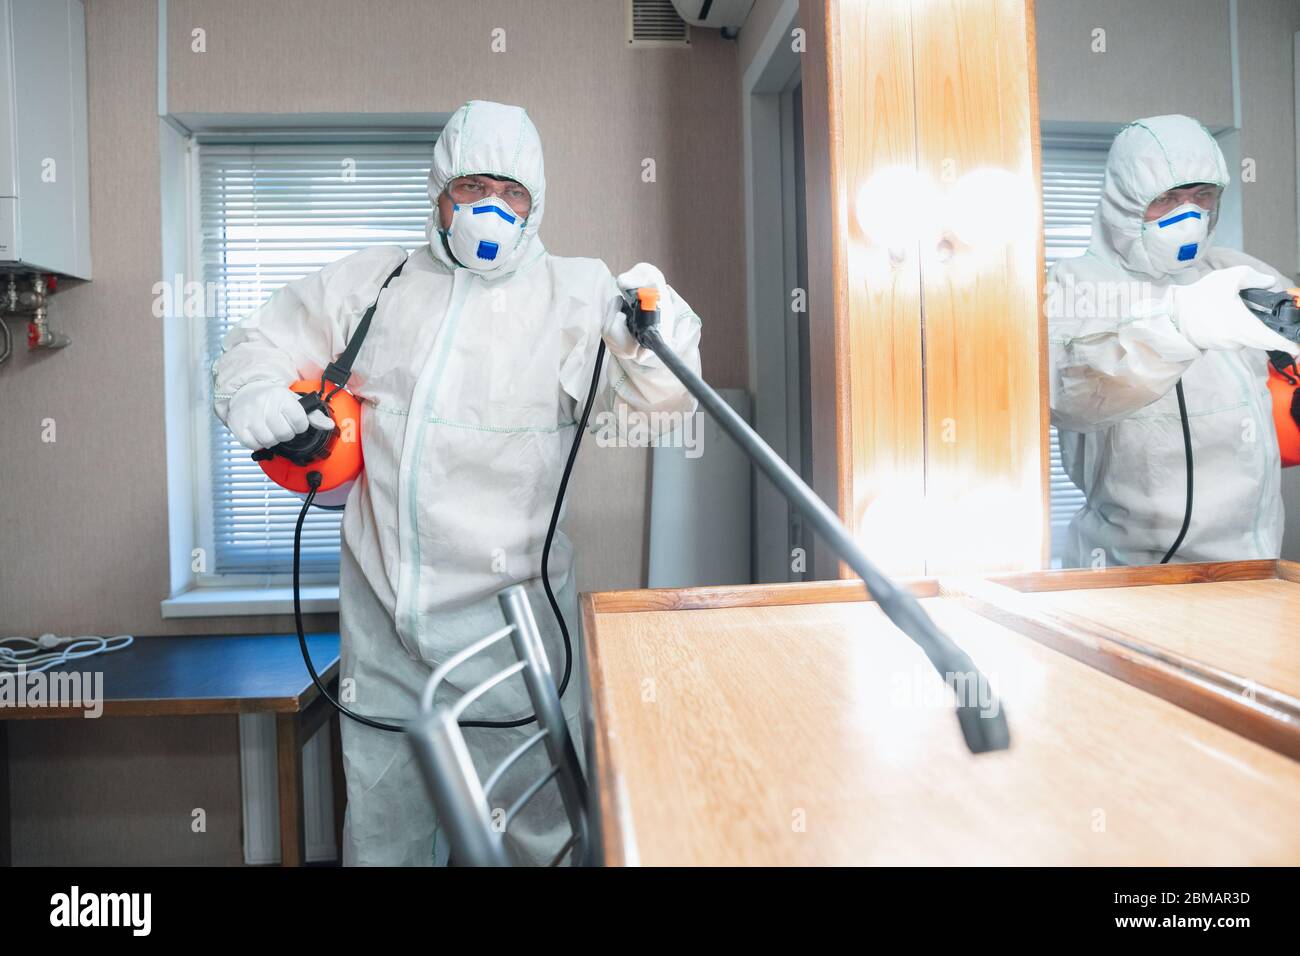 Coronavirus Pandemic. A disinfector in a protective suit and mask sprays disinfectants in house or office. Protection against COVID-19 disease. Prevention of spreding pneumonia virus with surfaces. Stock Photo